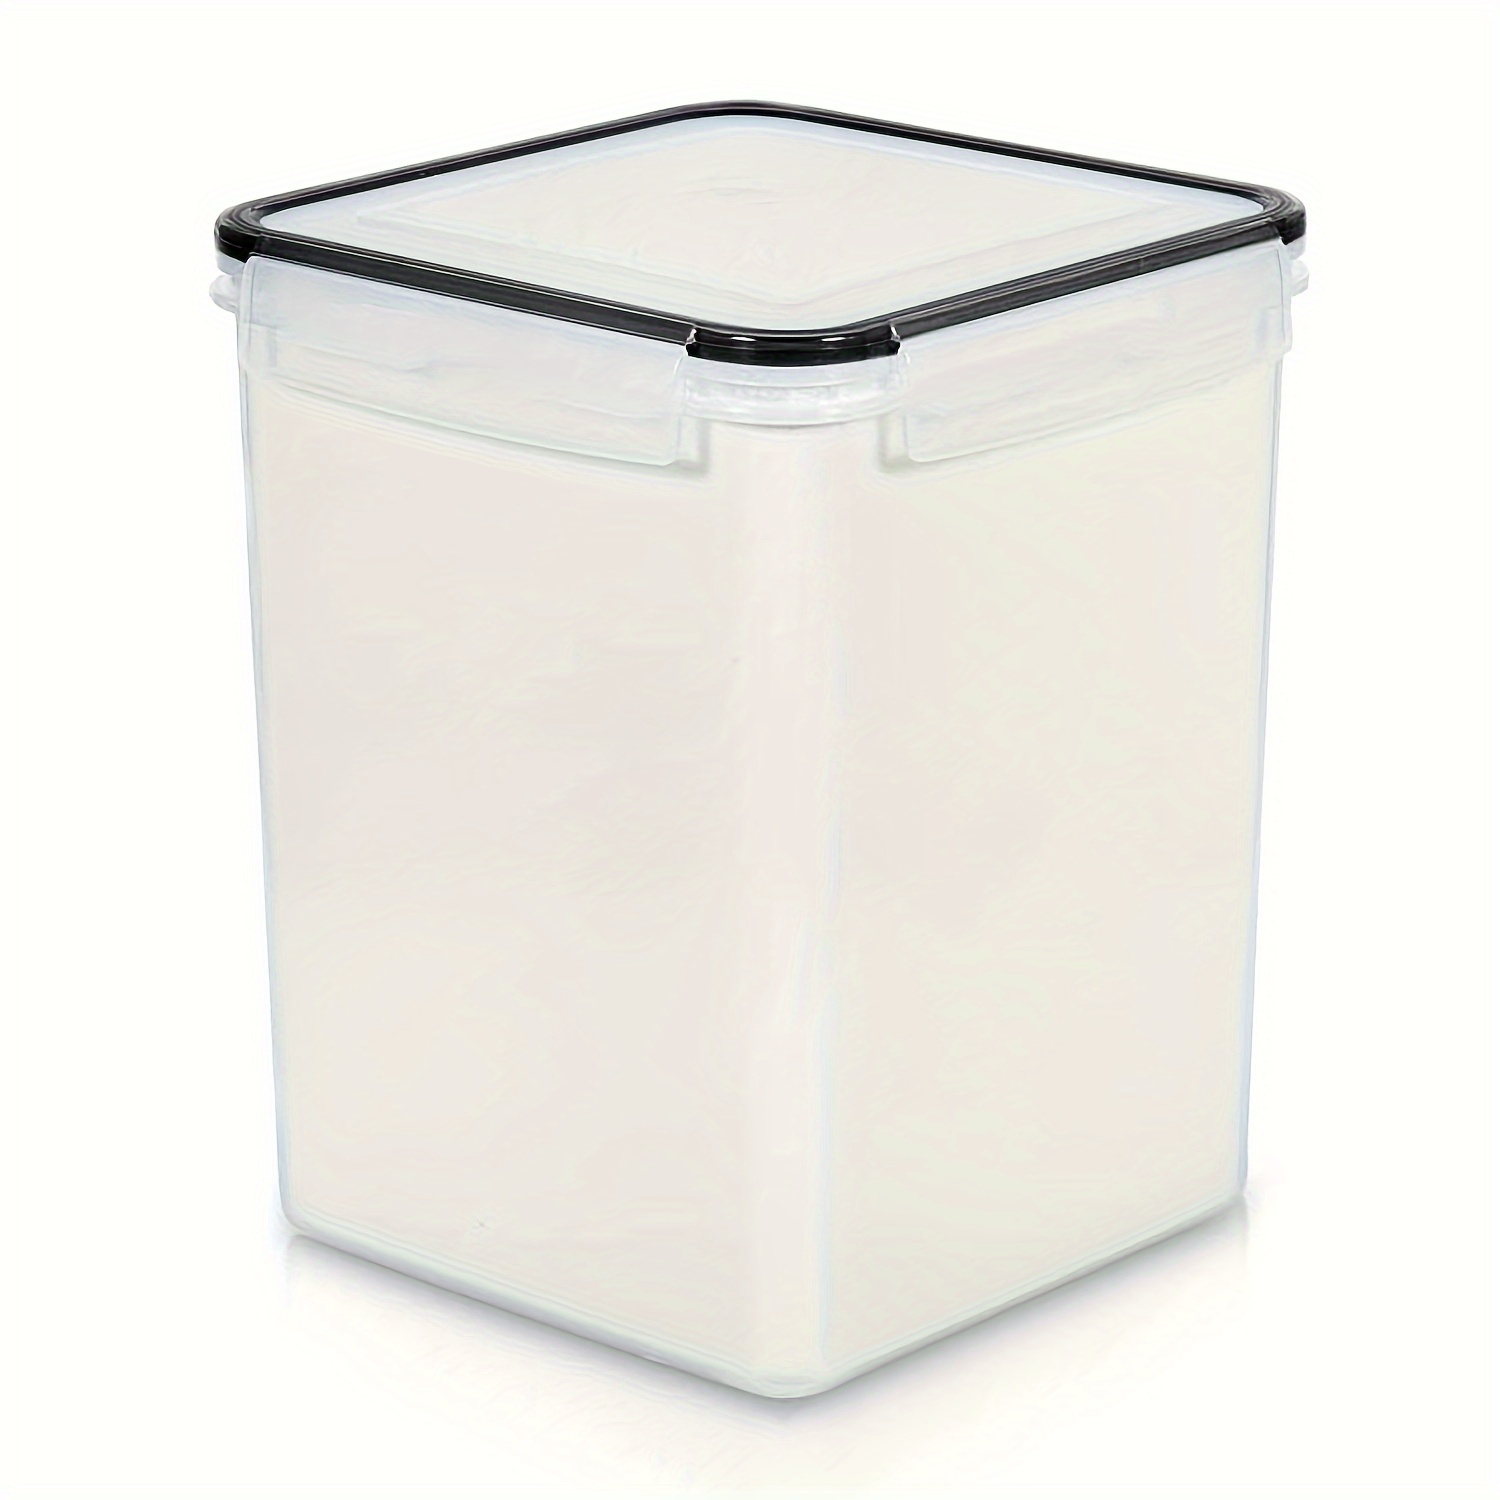 Large Plastic Storage Container Bins (Set of 2)